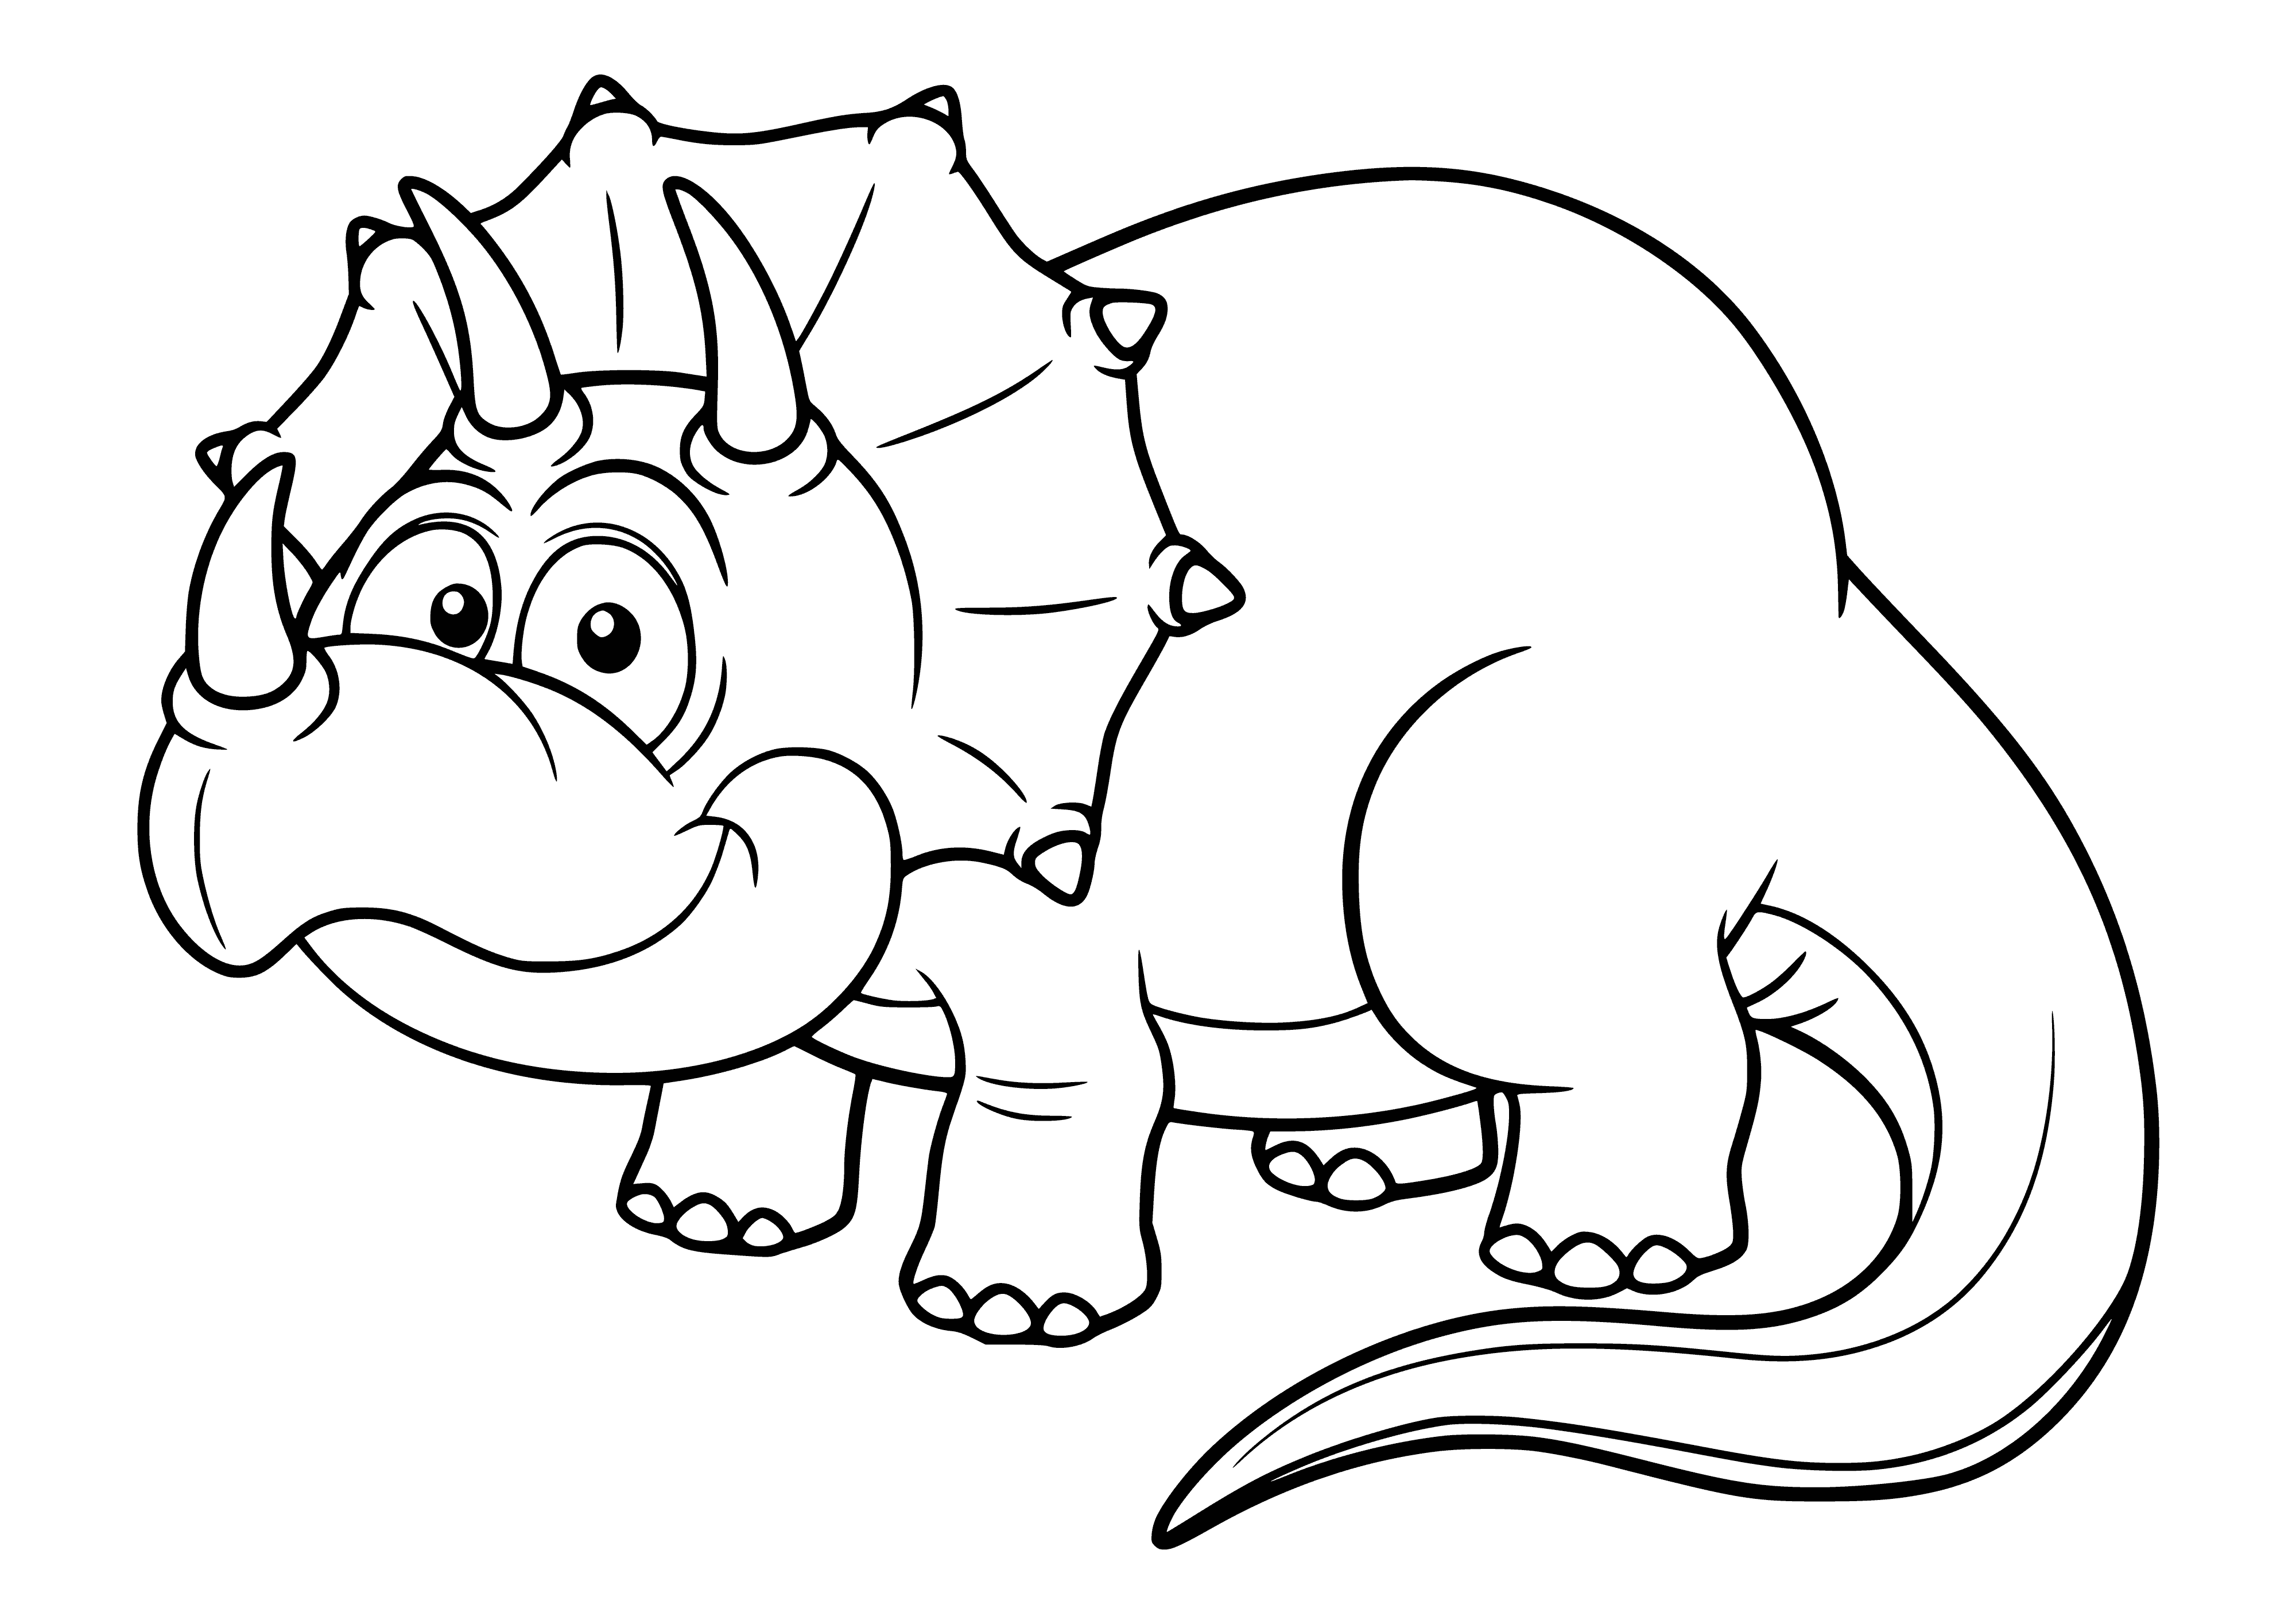 Adult triceratops coloring page